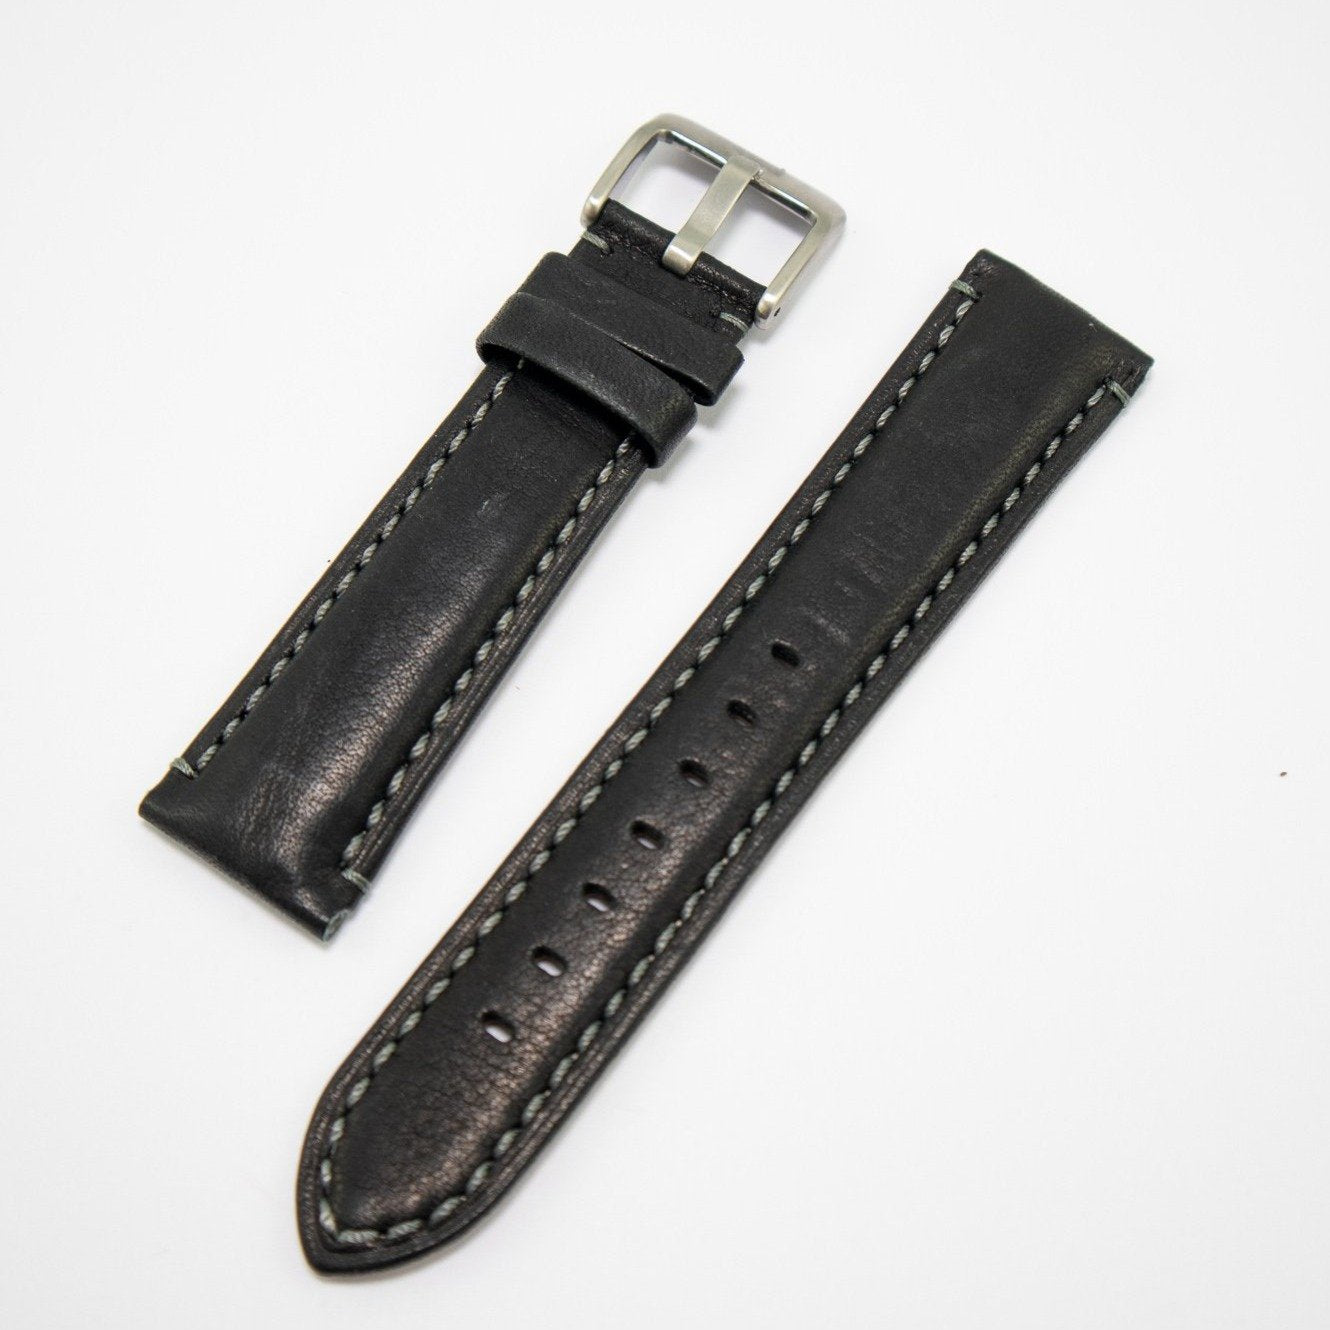 Alpine Watchstrap - Padded Stitched Waterproof Leather /